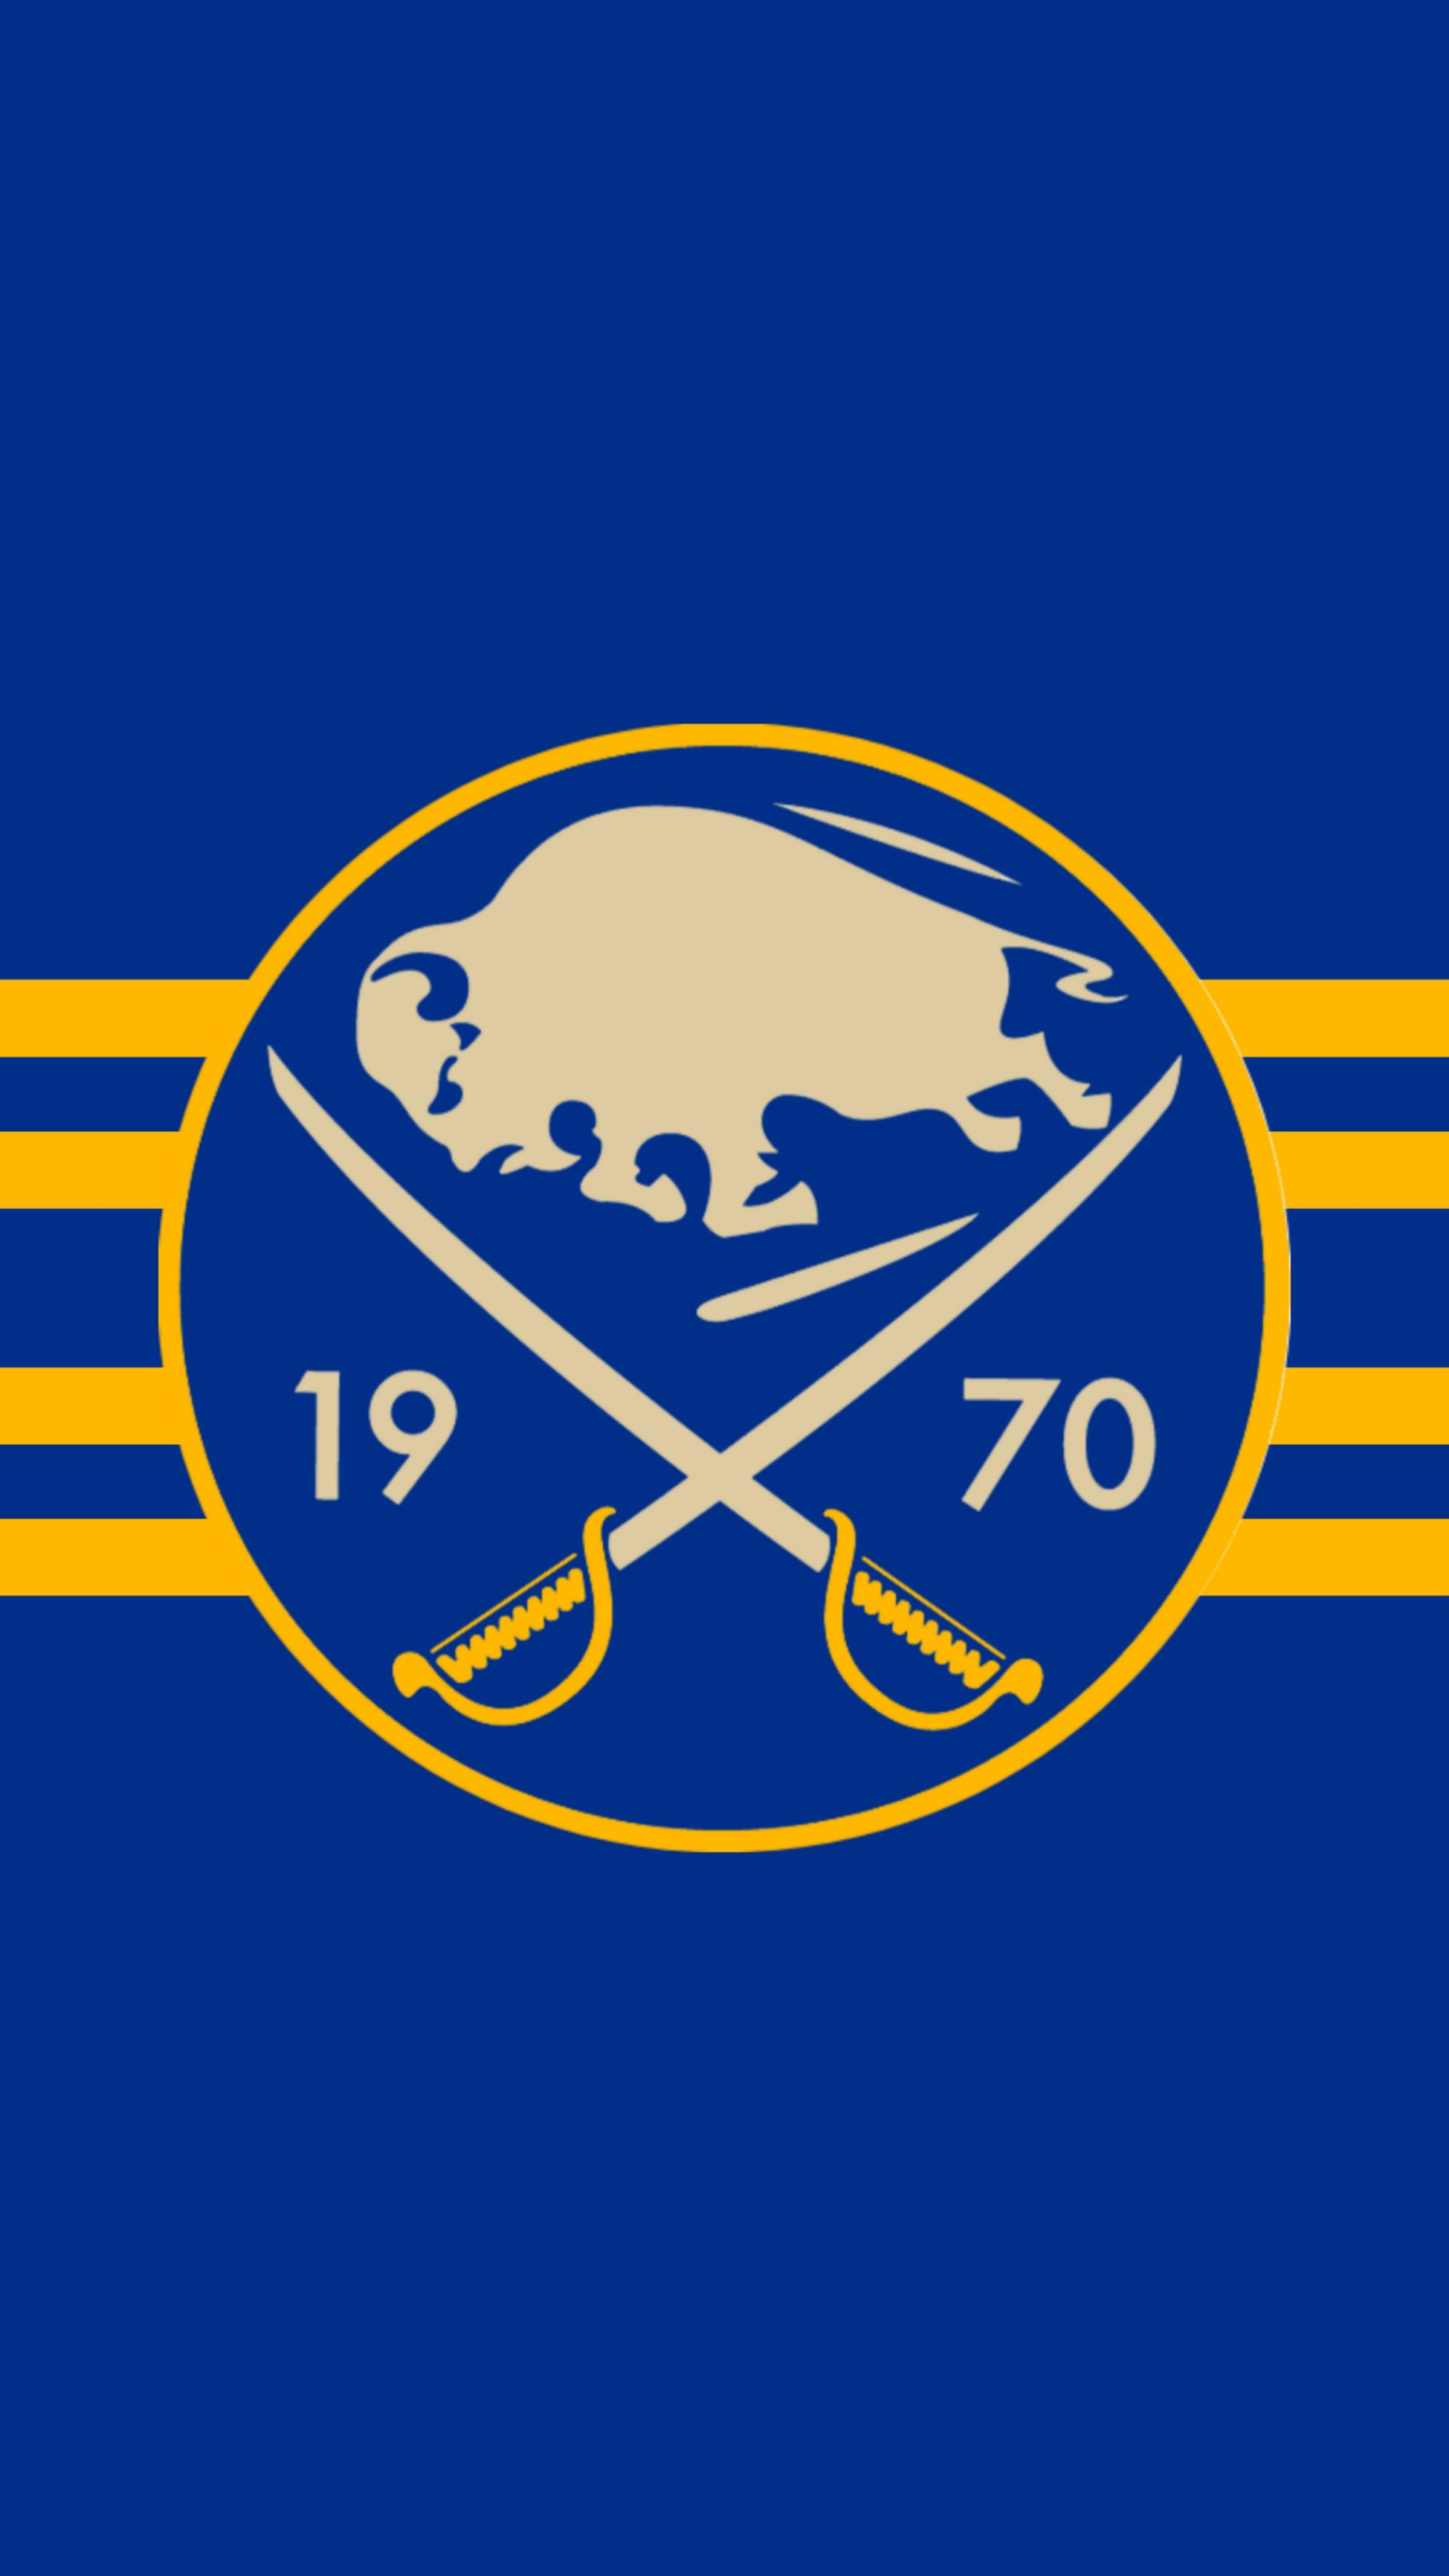 1949x3464 I Made Some Phone Wallpapers Based On The Sabres' Various Looks Over The Years, Enjoy! : r/sabres